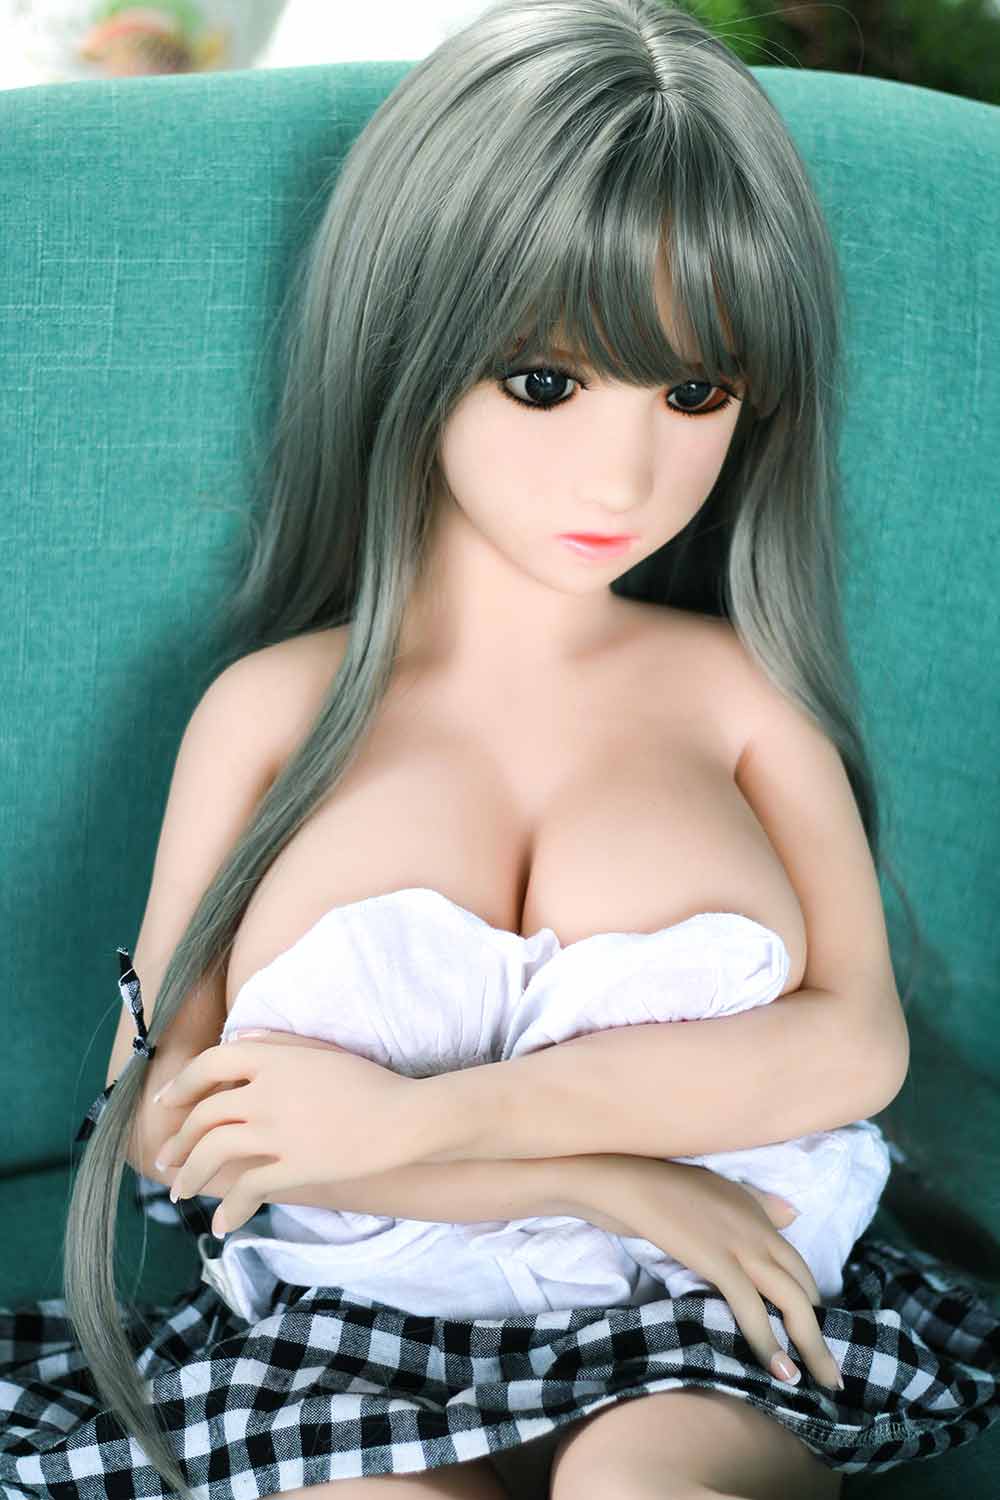 Mini sex doll with hands folded on chest